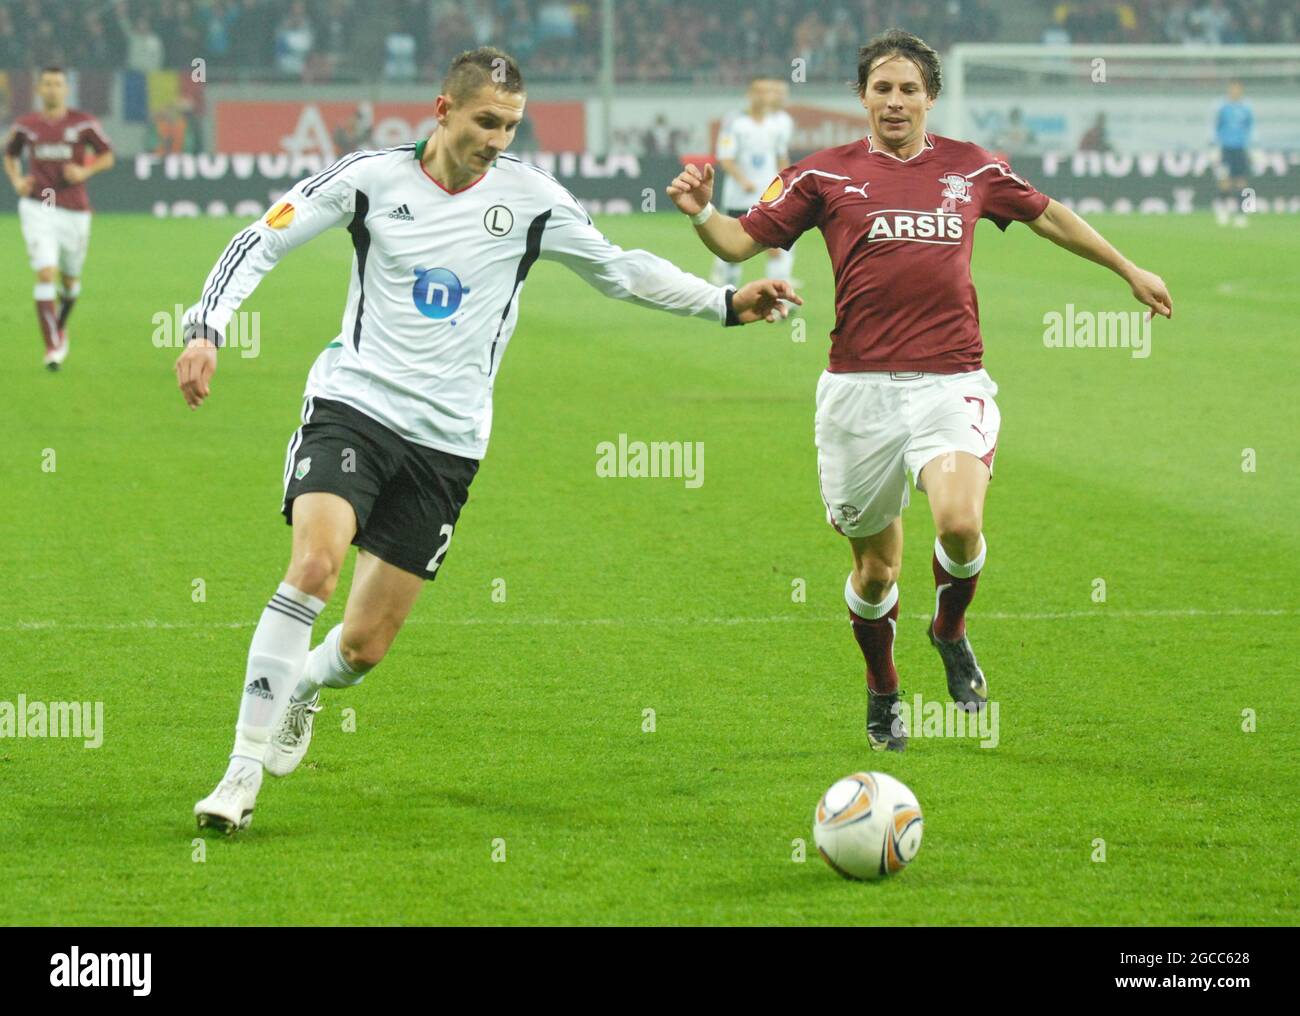 BUCHAREST, ROMANIA - OCTOBER 20, 2011: Artur Jedrzejczyk (L) of Legia and Ciprian Deac (R) of Rapid pictured during the UEFA Europa League Group C game between Rapid Bucuresti and Legia Warszawa at National Arena. Stock Photo